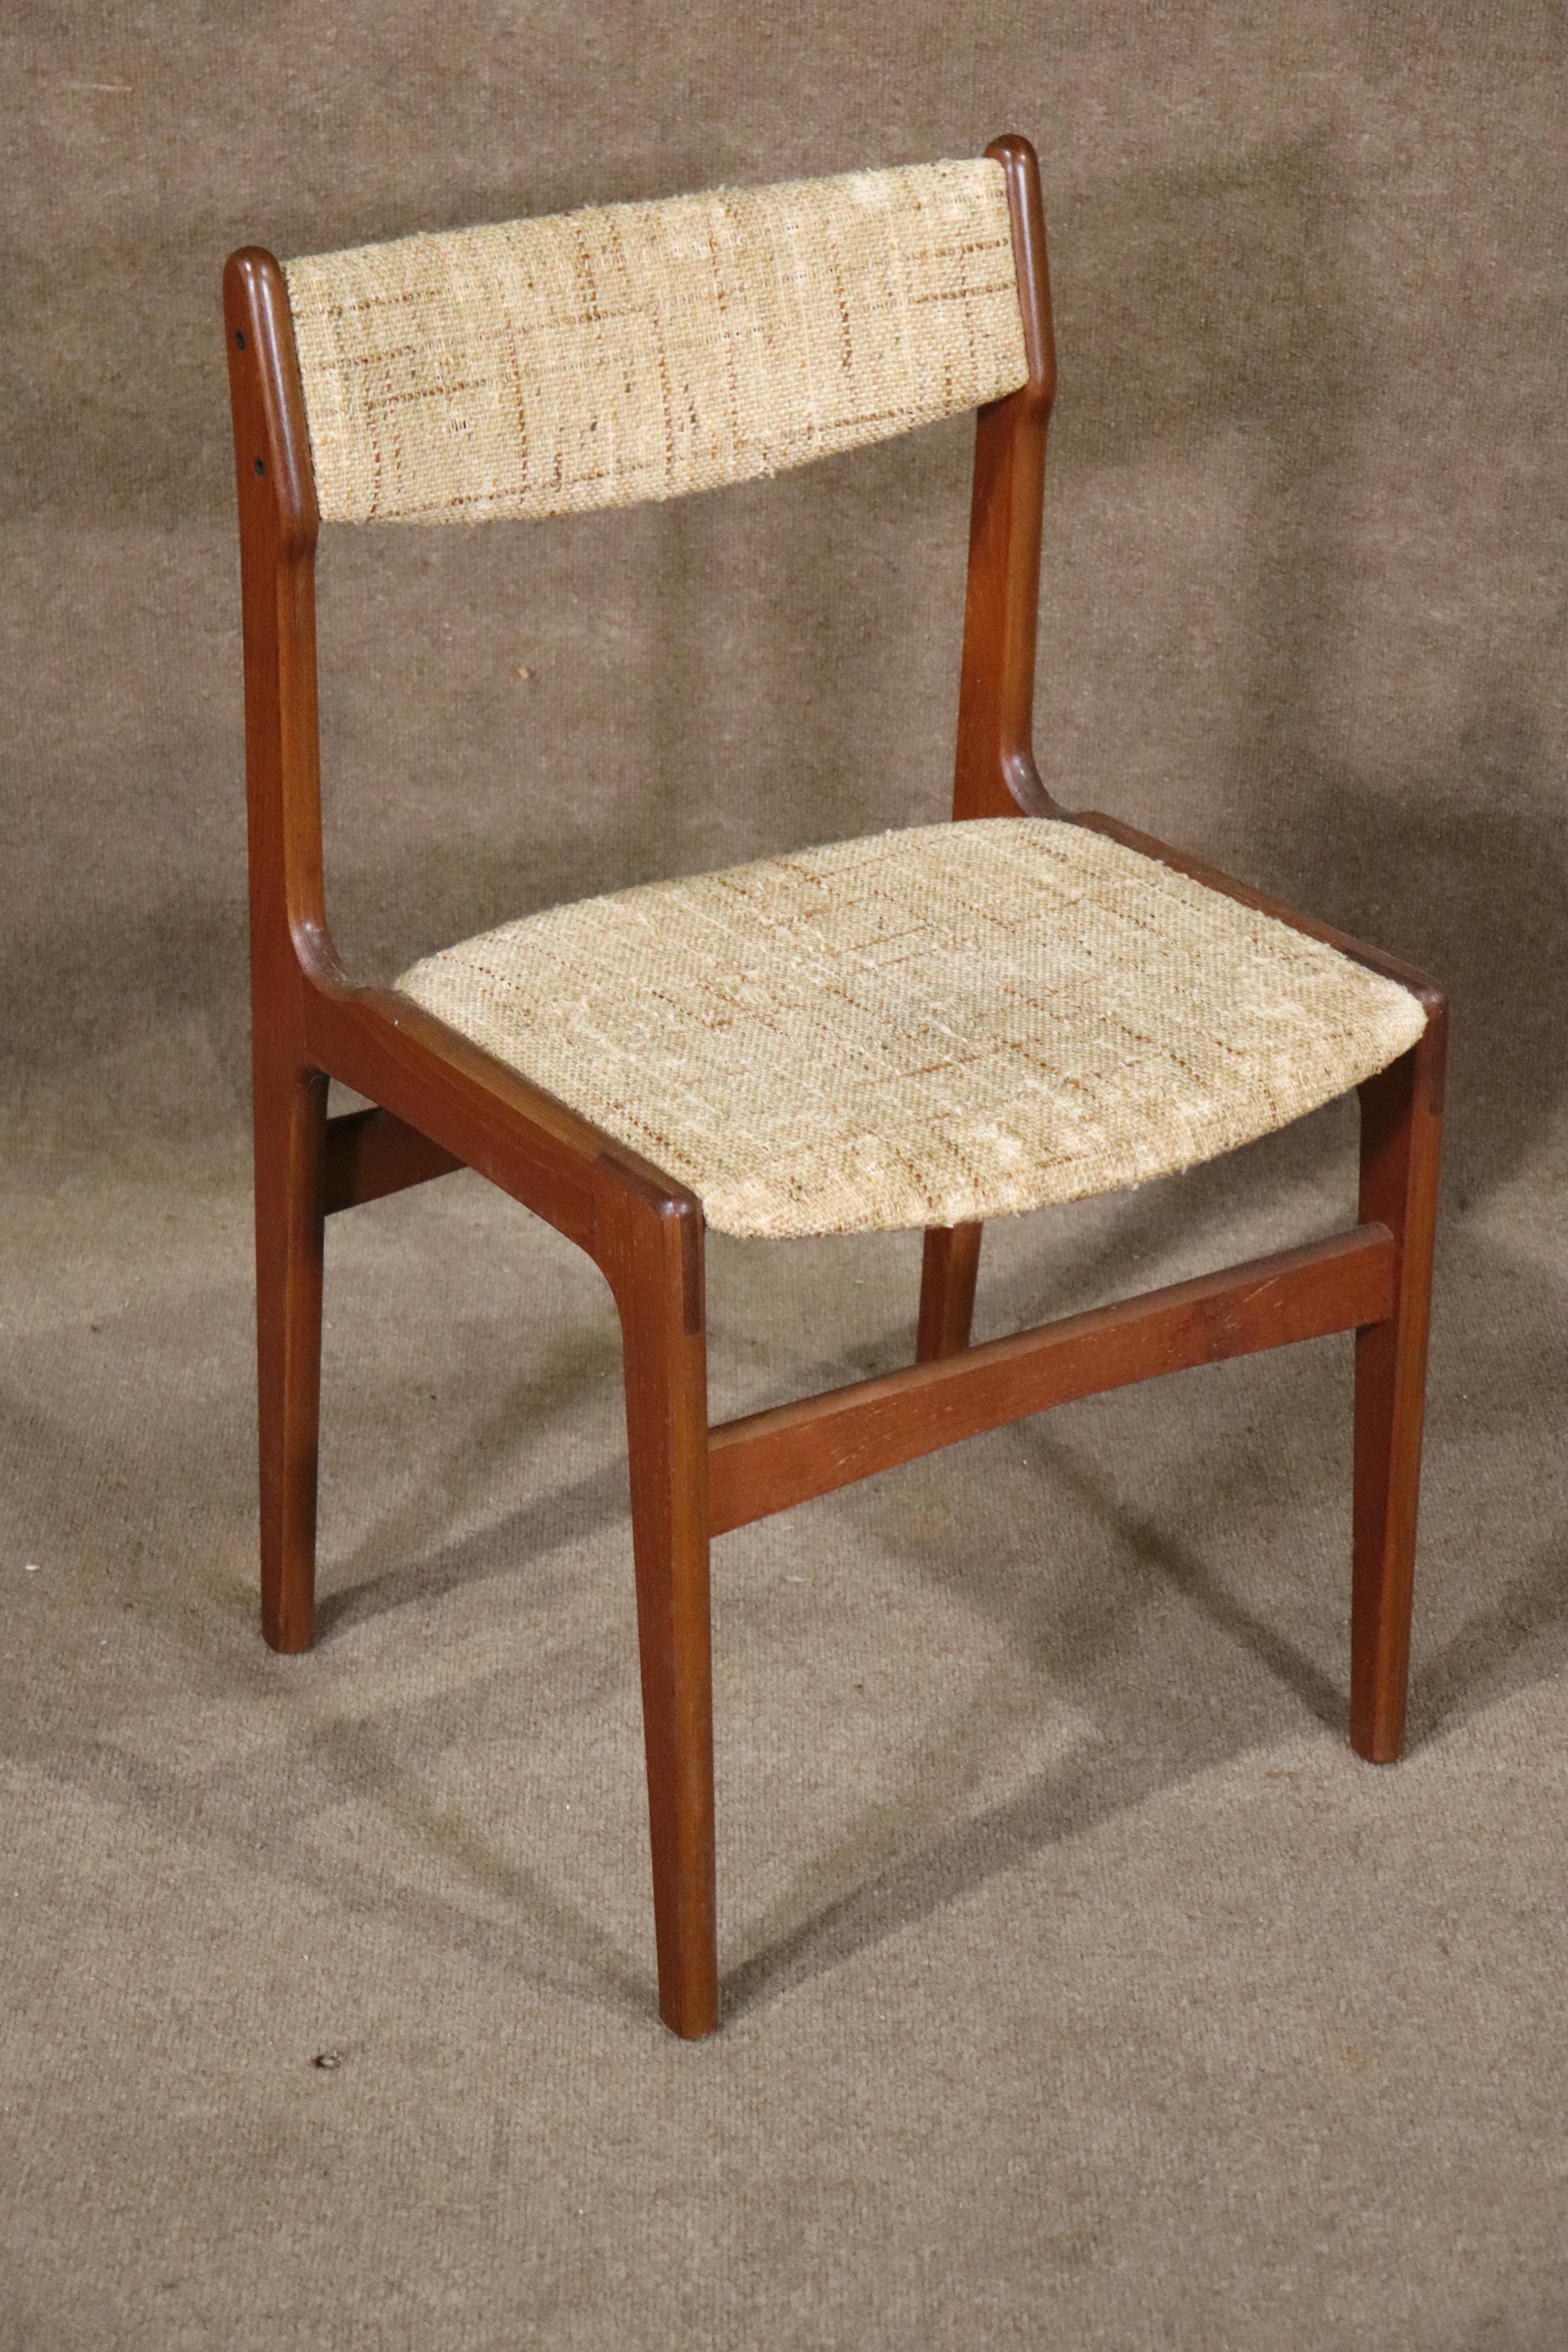 Set of four dining chairs with soft teak frames and upholstered seat and back. Danish made Mid-Century Modern design.
Please confirm location NY or NJ.